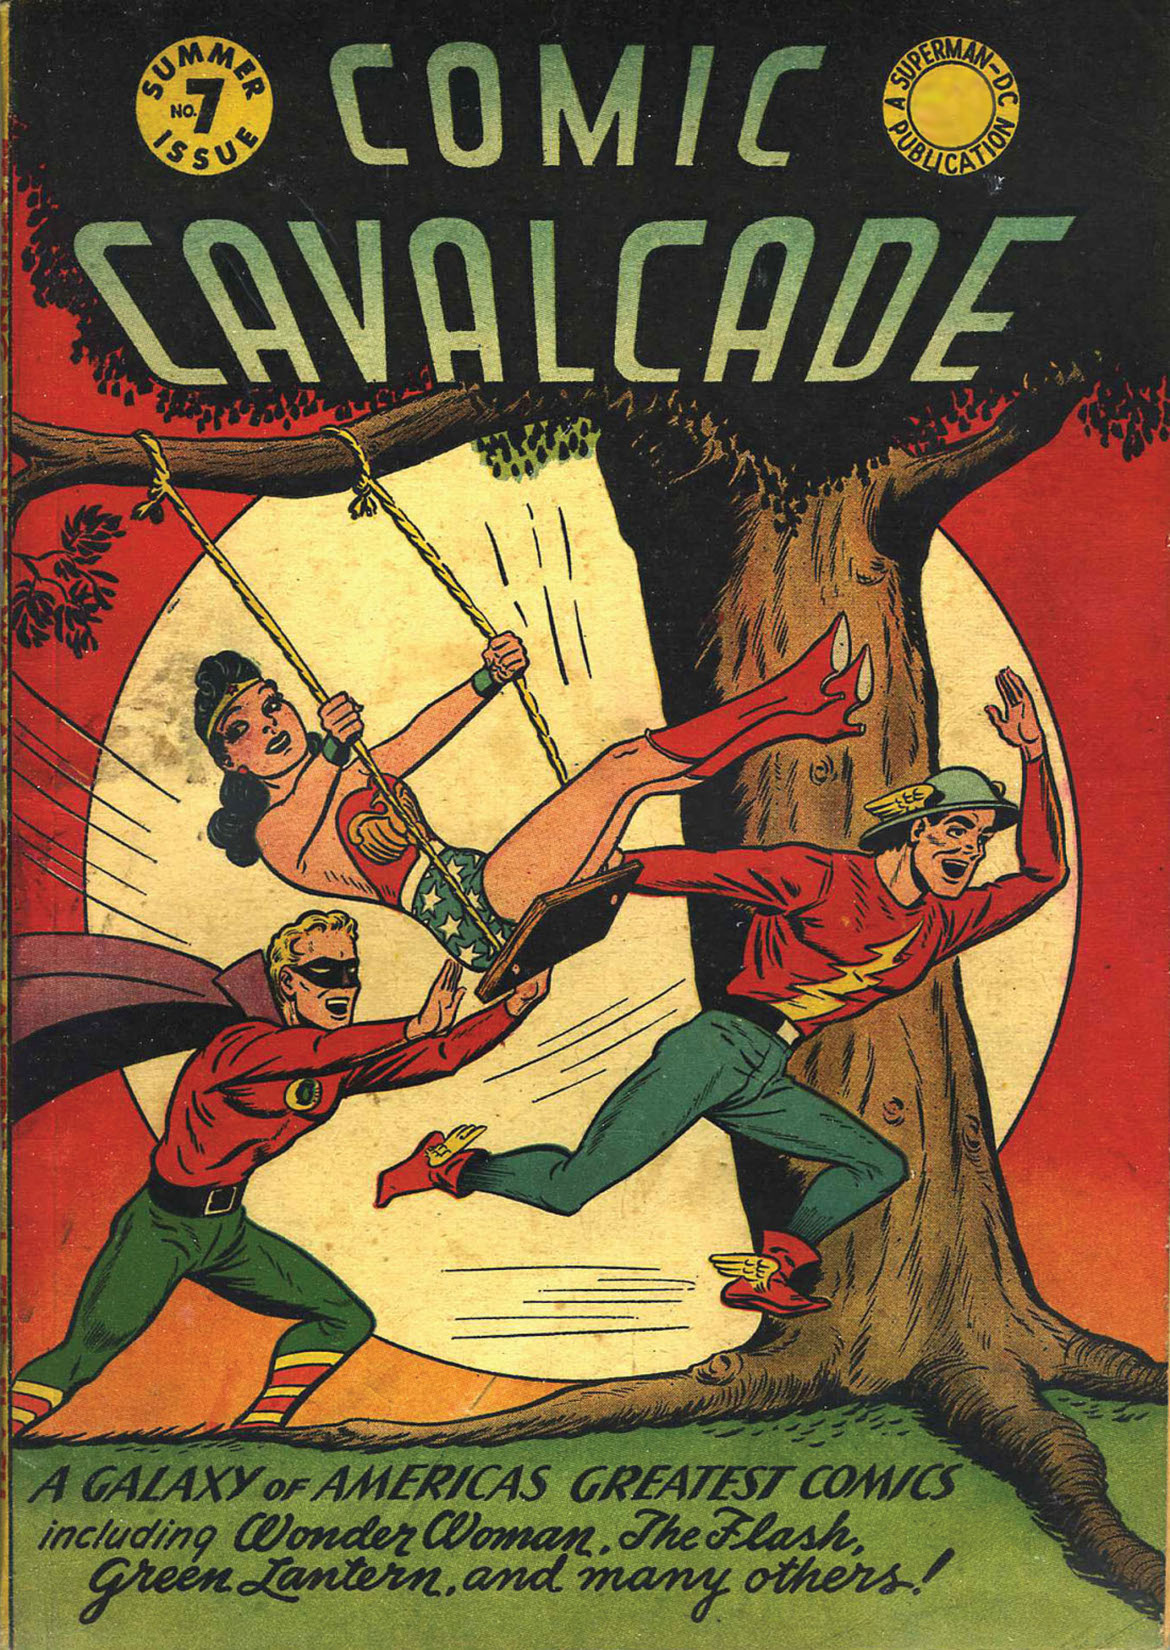 Comic Cavalcade #7 preview images